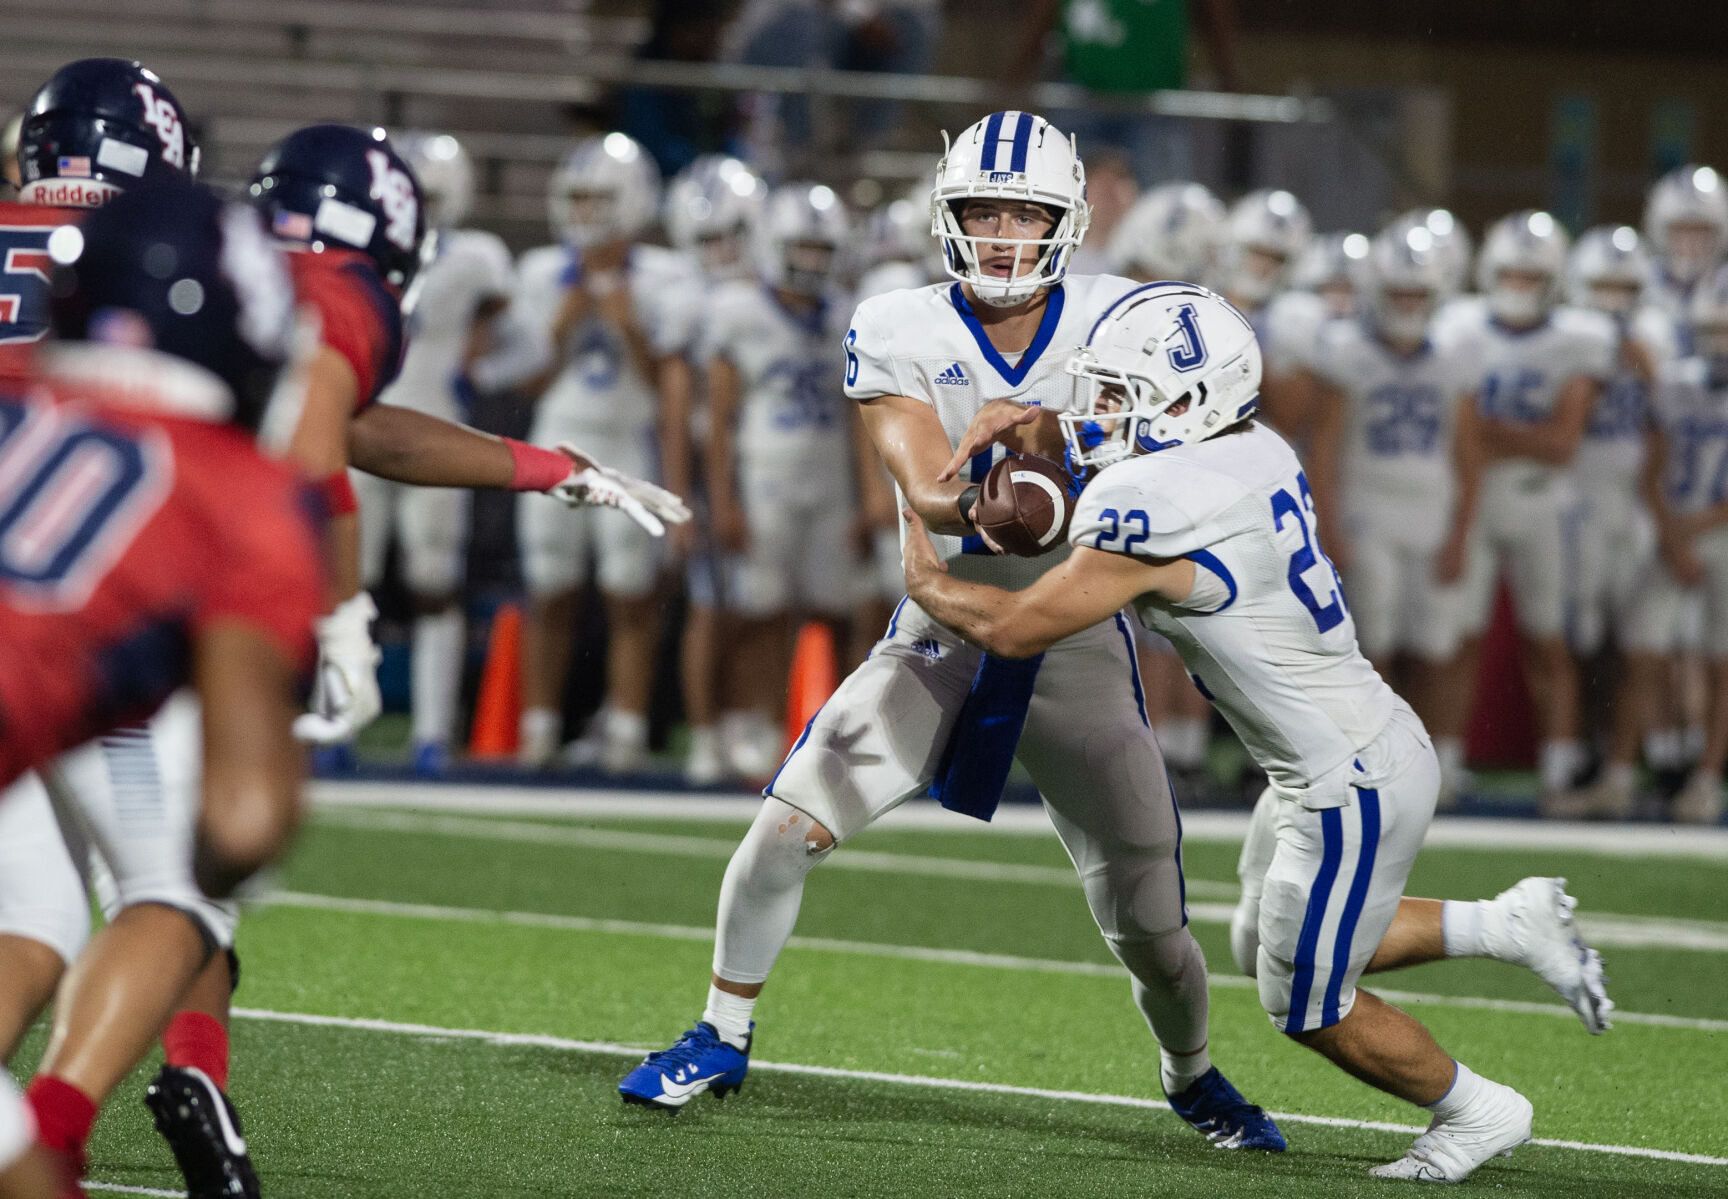 Jesuit Dominates Byrd in 23-2 Playoff Win; Berrigan Rushes for 184 Yards